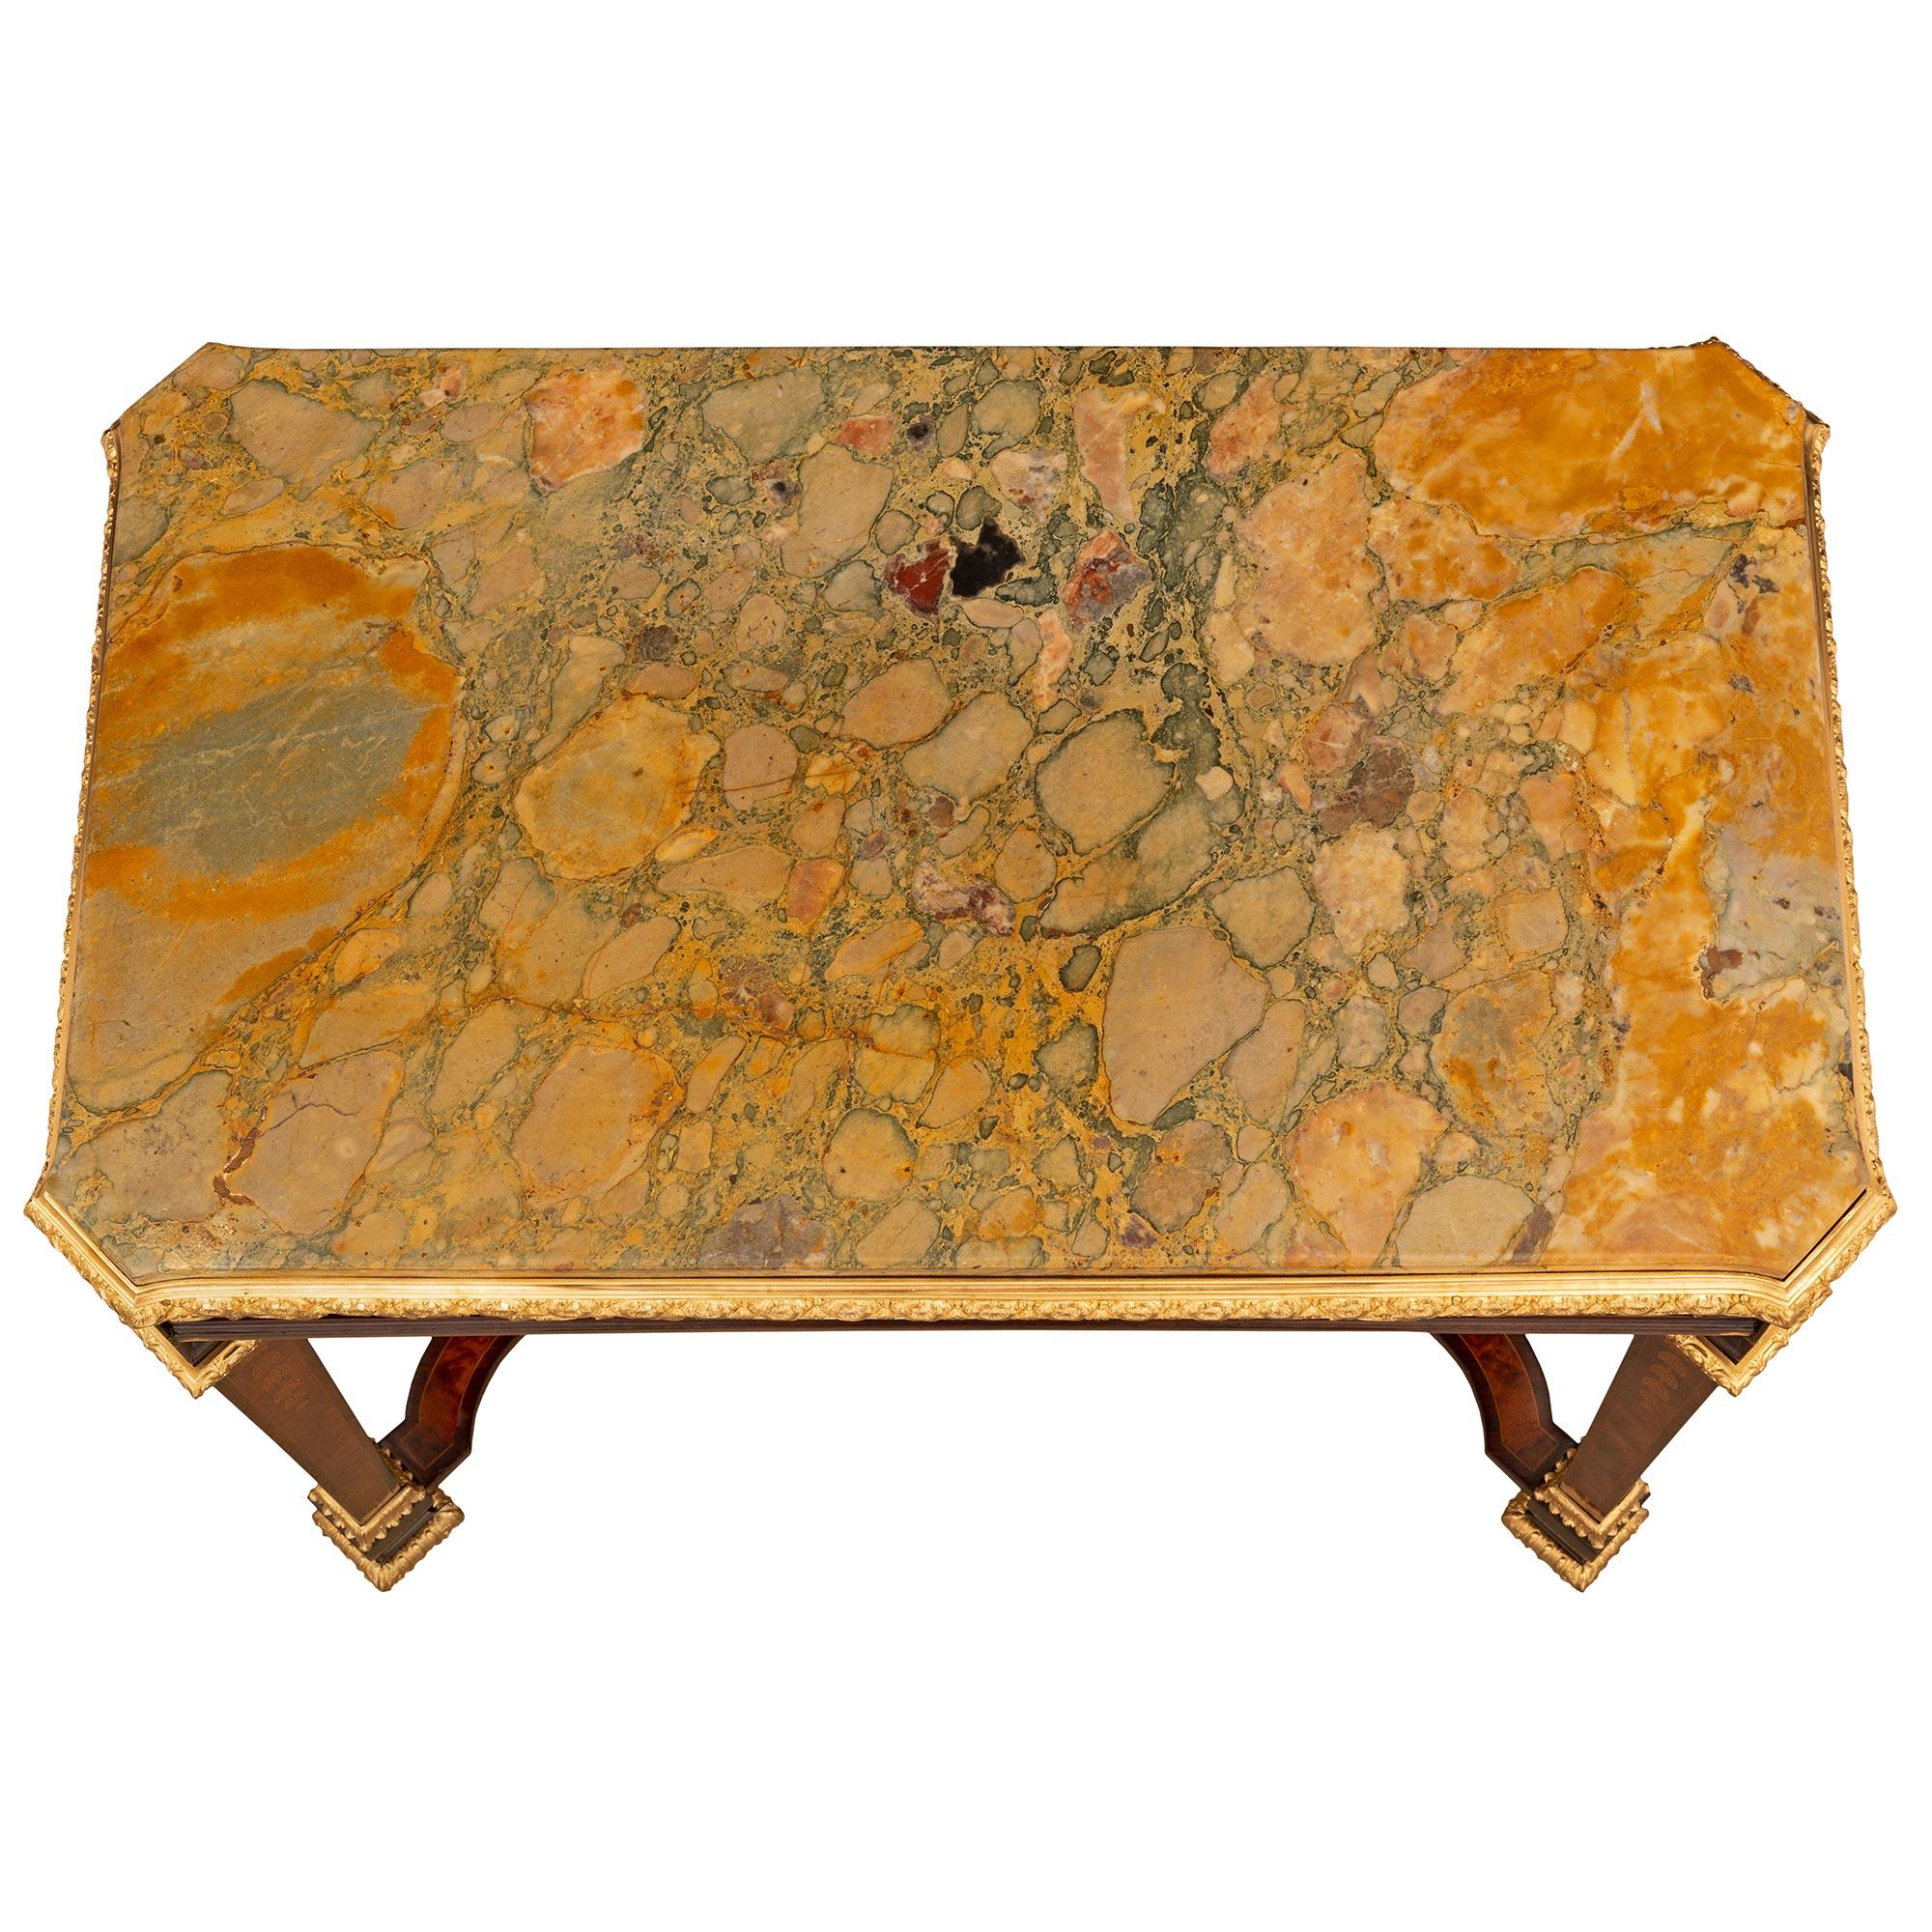 A stunning and extremely decorative French 19th century Louis XIV st. Kingwood, burl Walnut, ormolu, and Brèche marble side table. The table is raised by impressive square tapered legs with beautiful mottled feet, striking wrap around foliate ormolu